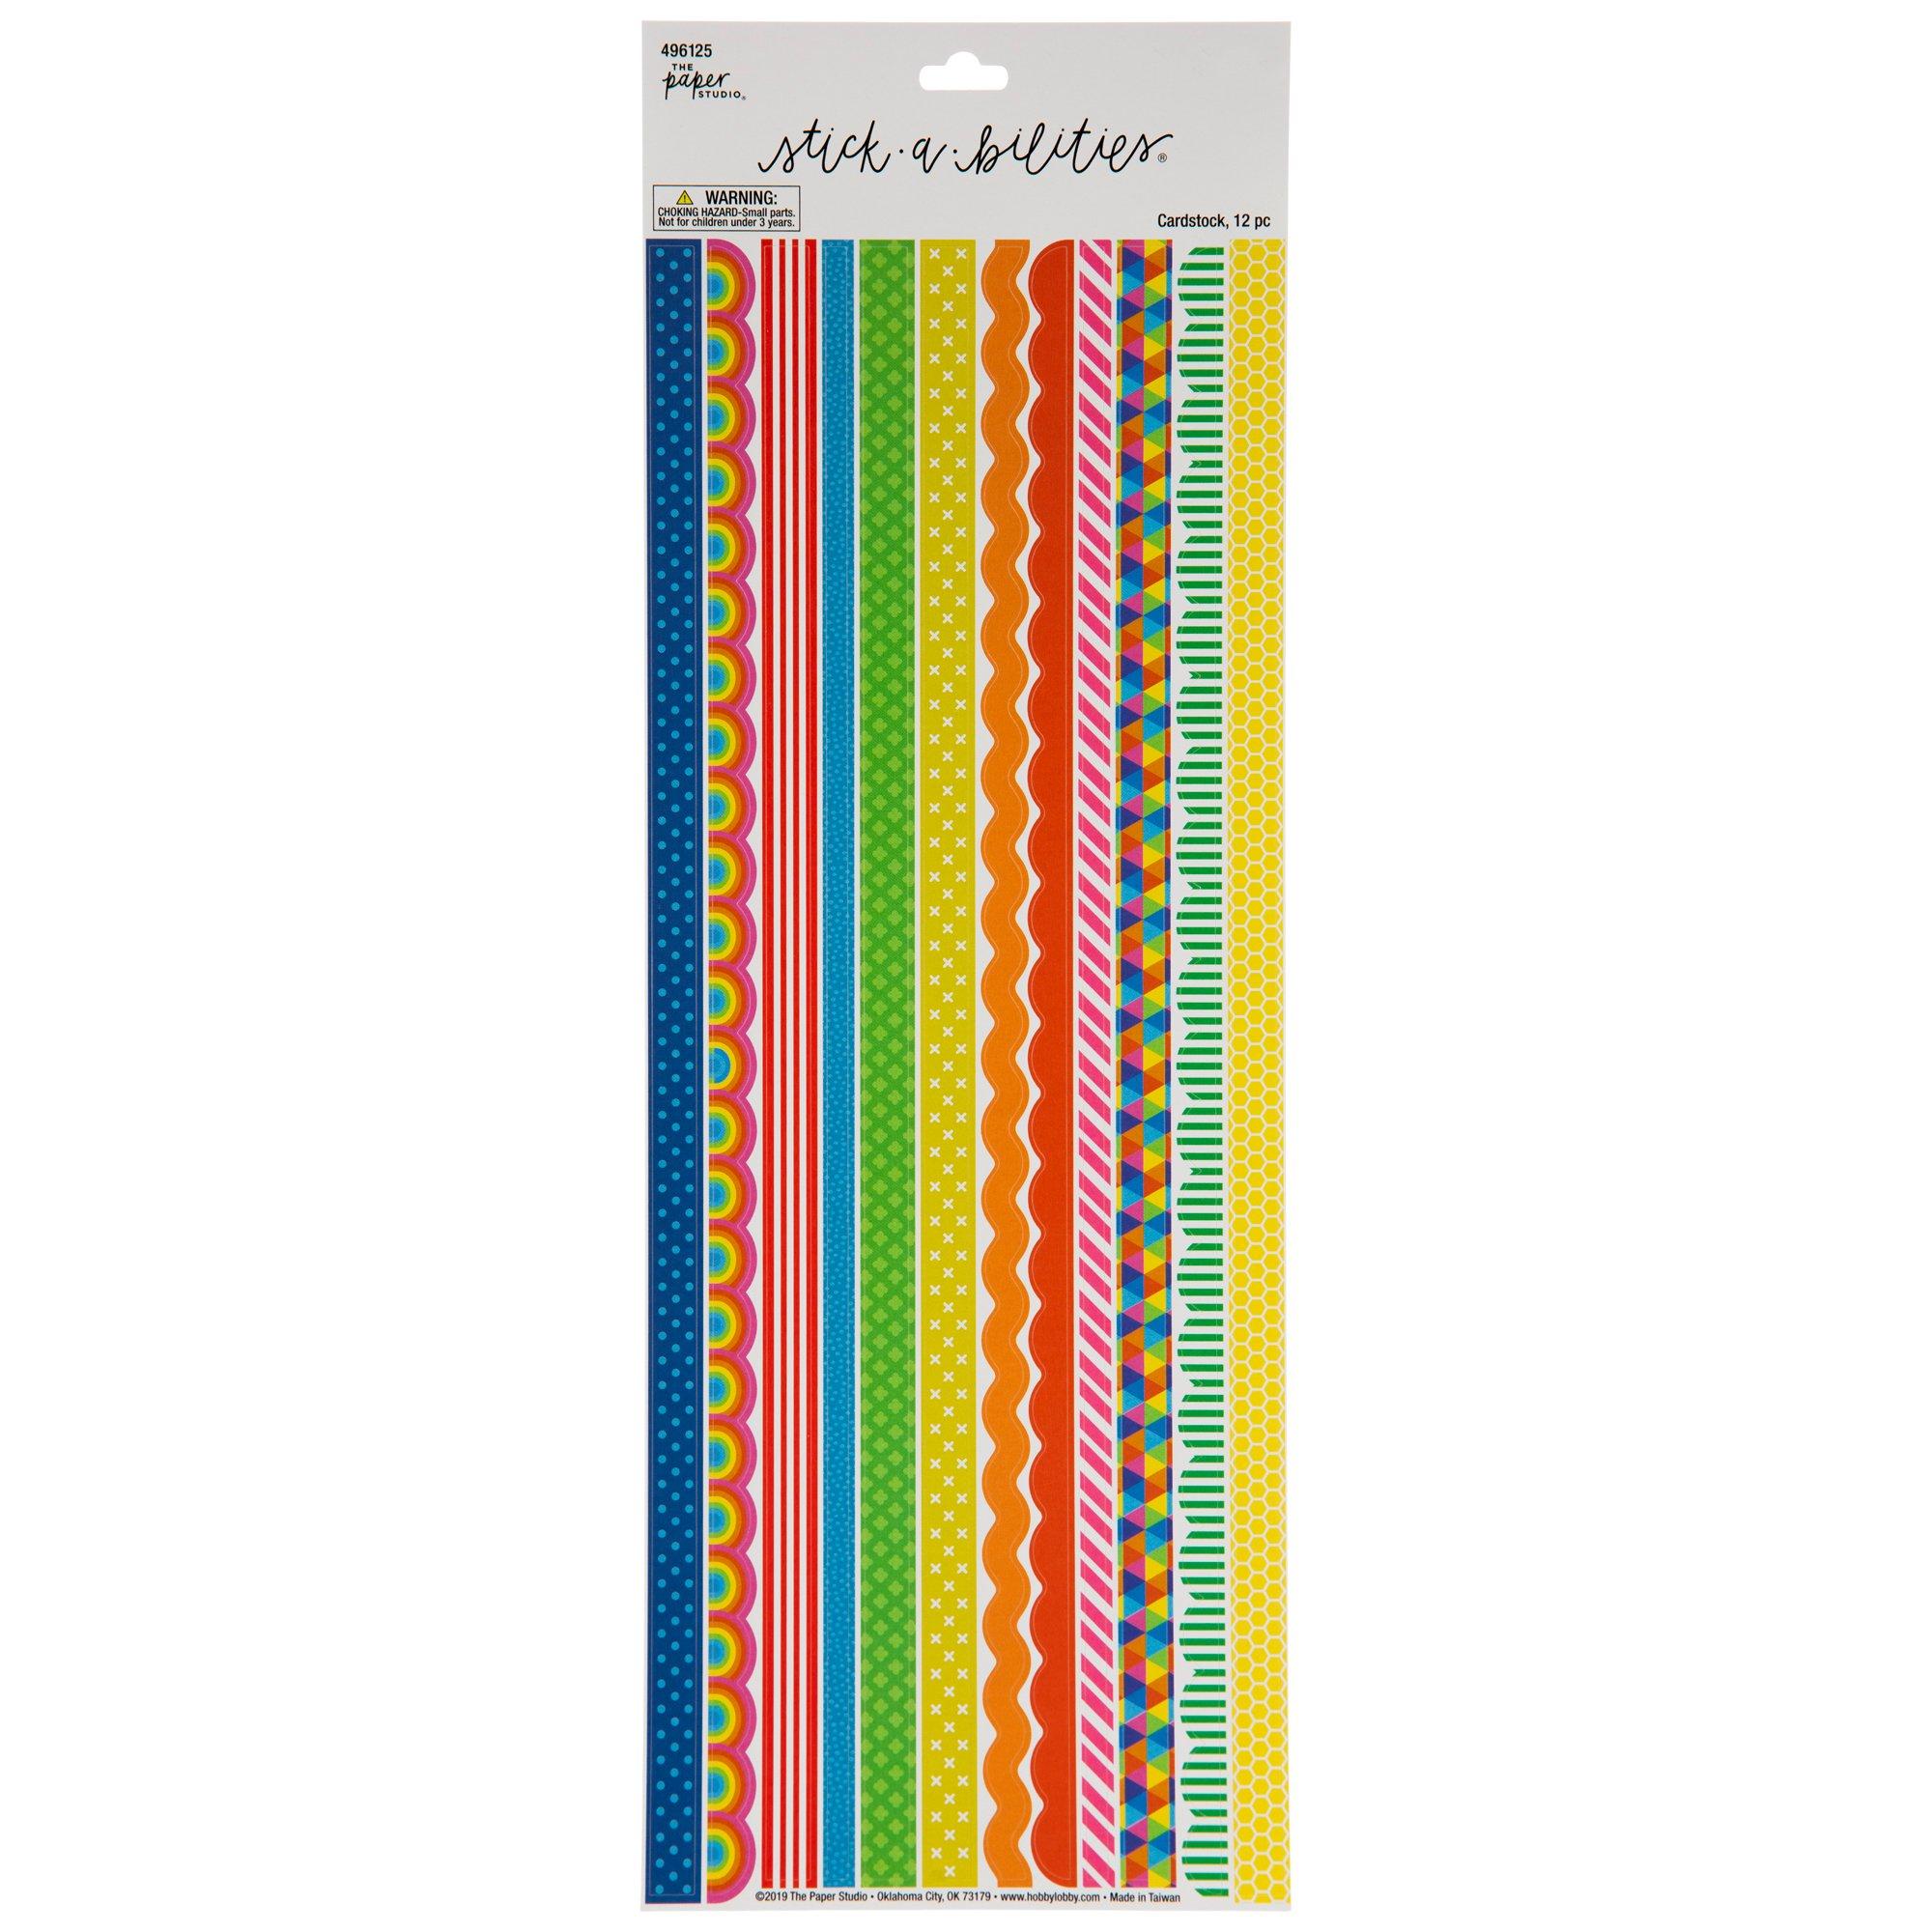 Multi-Color Letter Poster Board Stickers, Hobby Lobby, 2310068